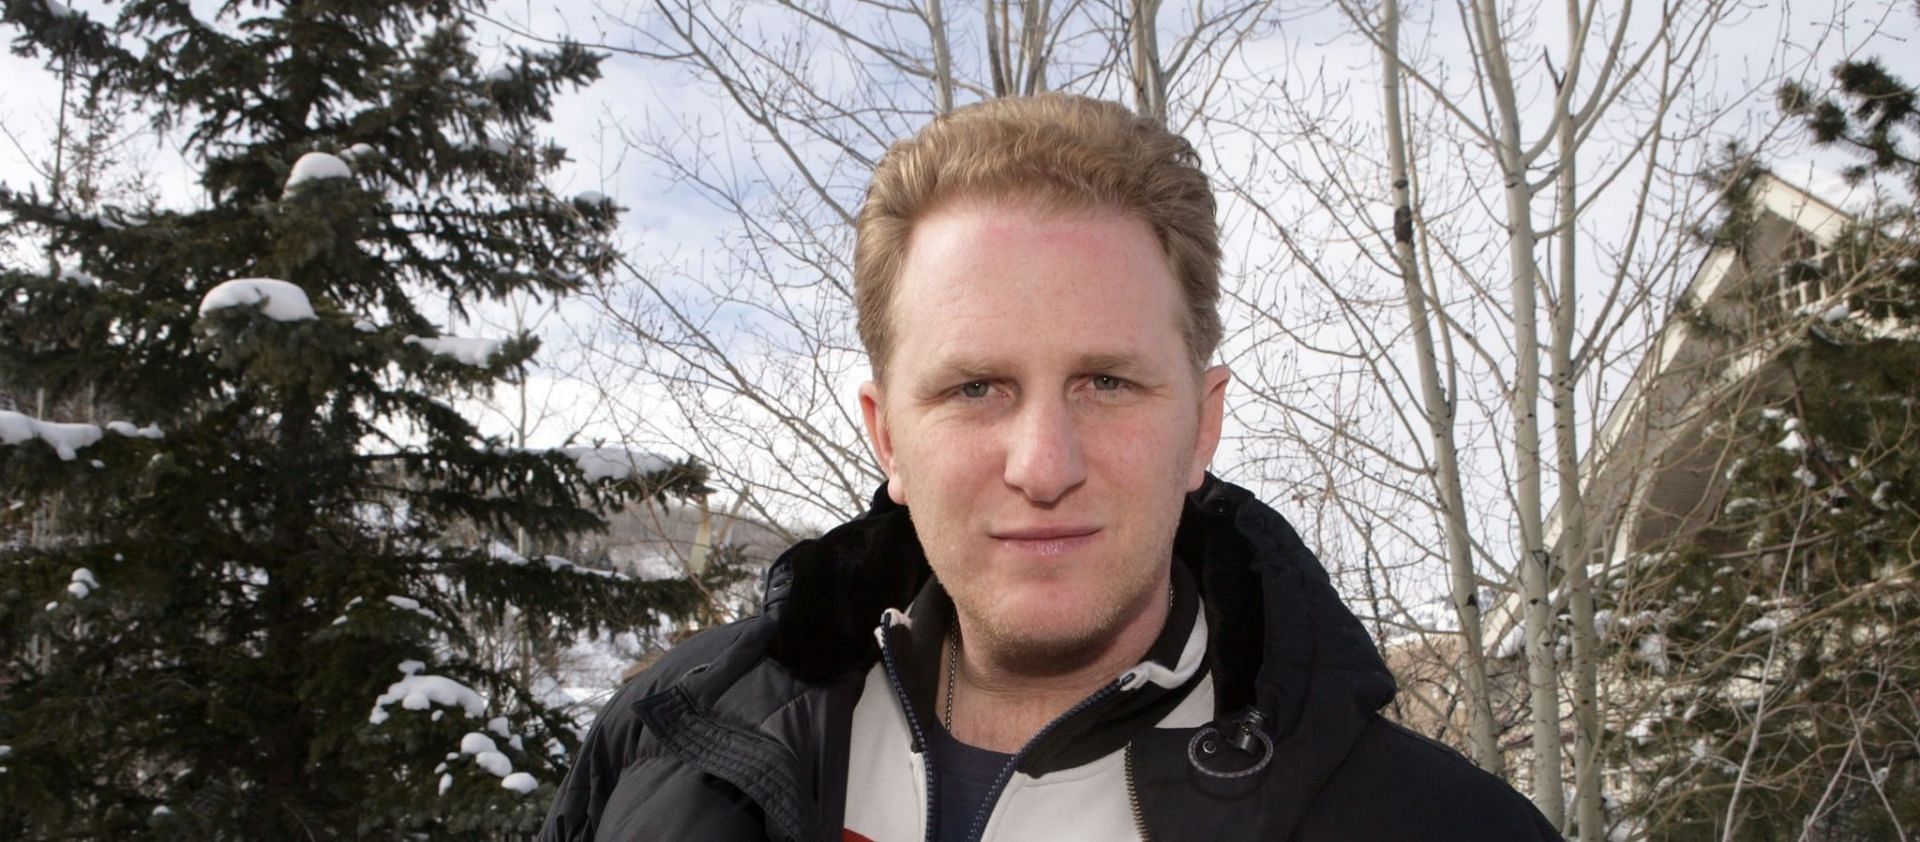 Michael Rapaport is an actor and comedian (Image via Randall Michelson/WireImage)